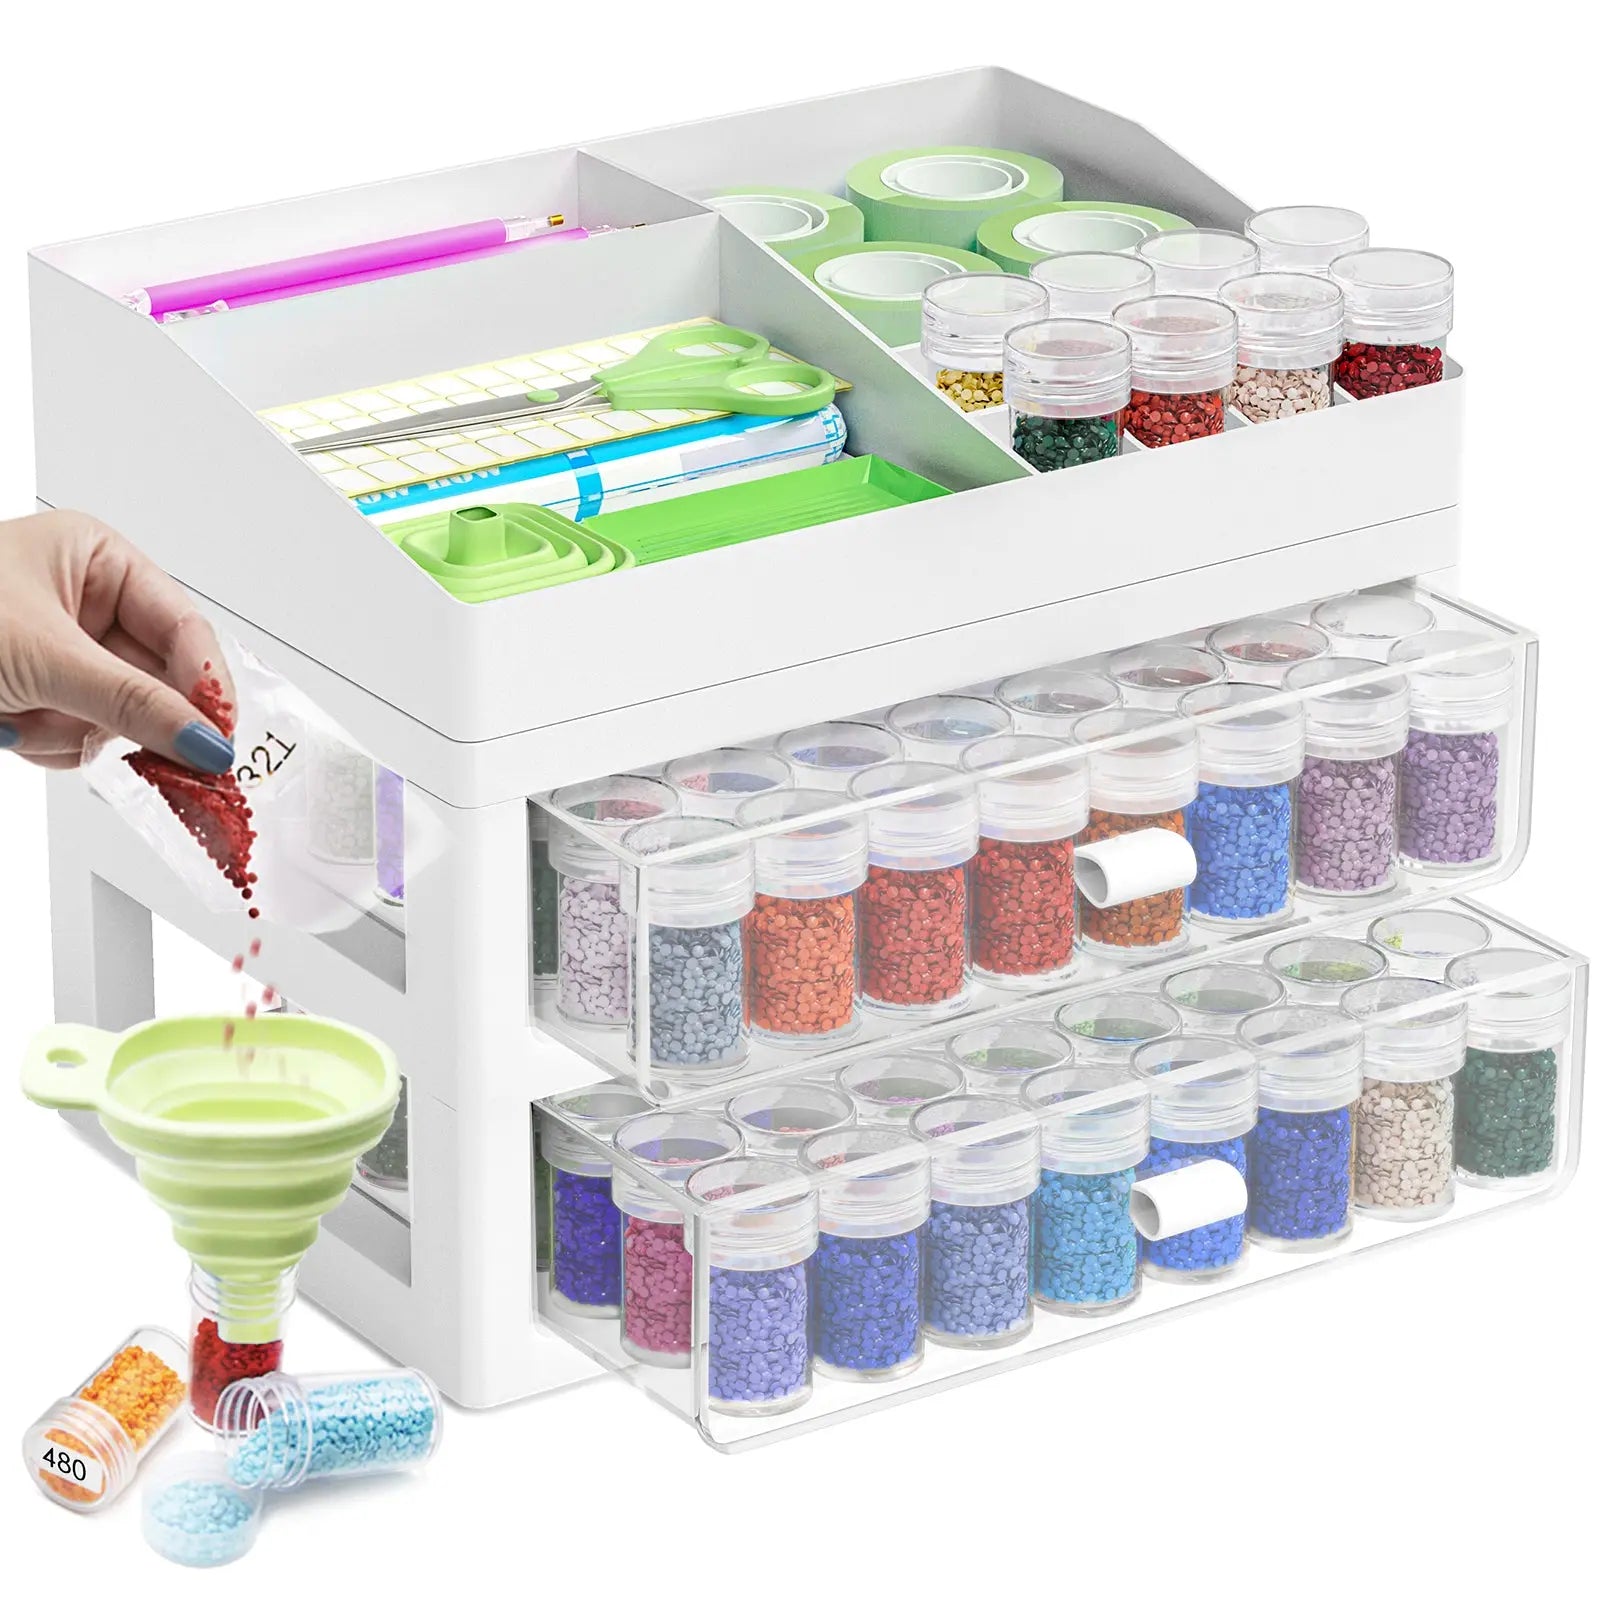  ARTDOT Diamond Painting Storage Boxes, 60 Slots Bead Storage  with 5D Diamond Art Accessories and Tools Kit : Arts, Crafts & Sewing